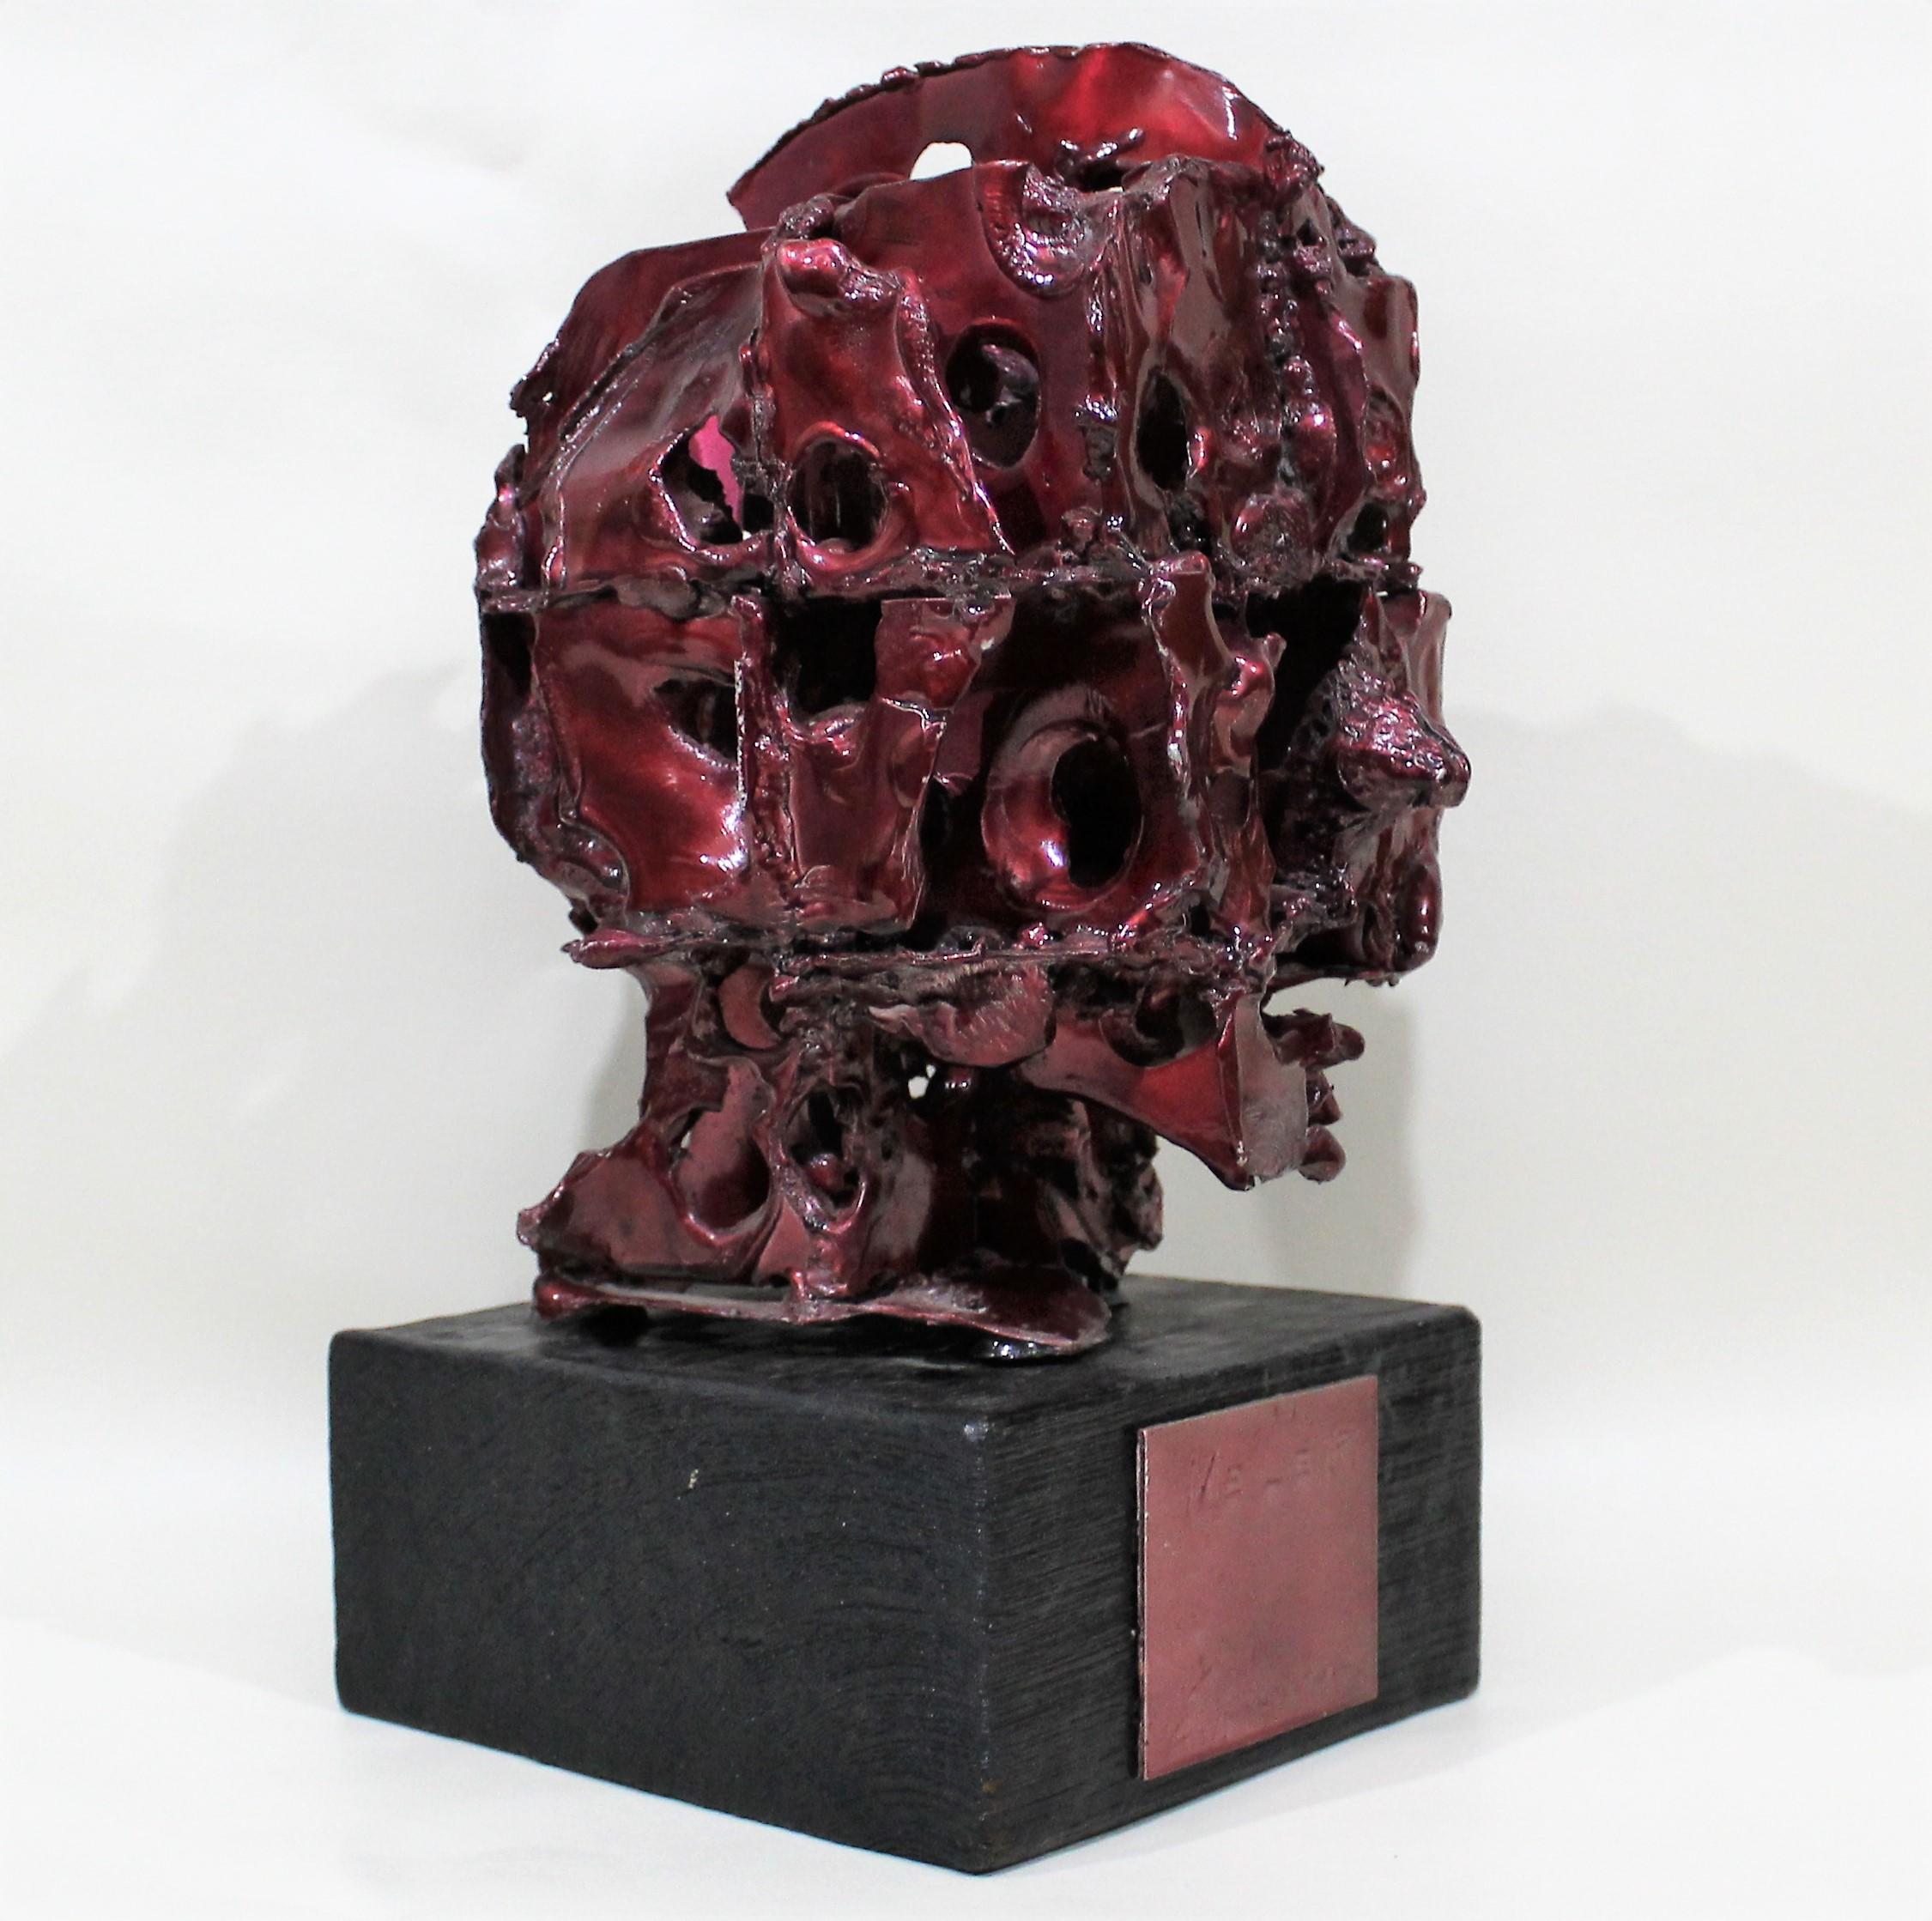 Unique brutalistic sculpture of head/face. This piece is signed but we can't make out the signature.